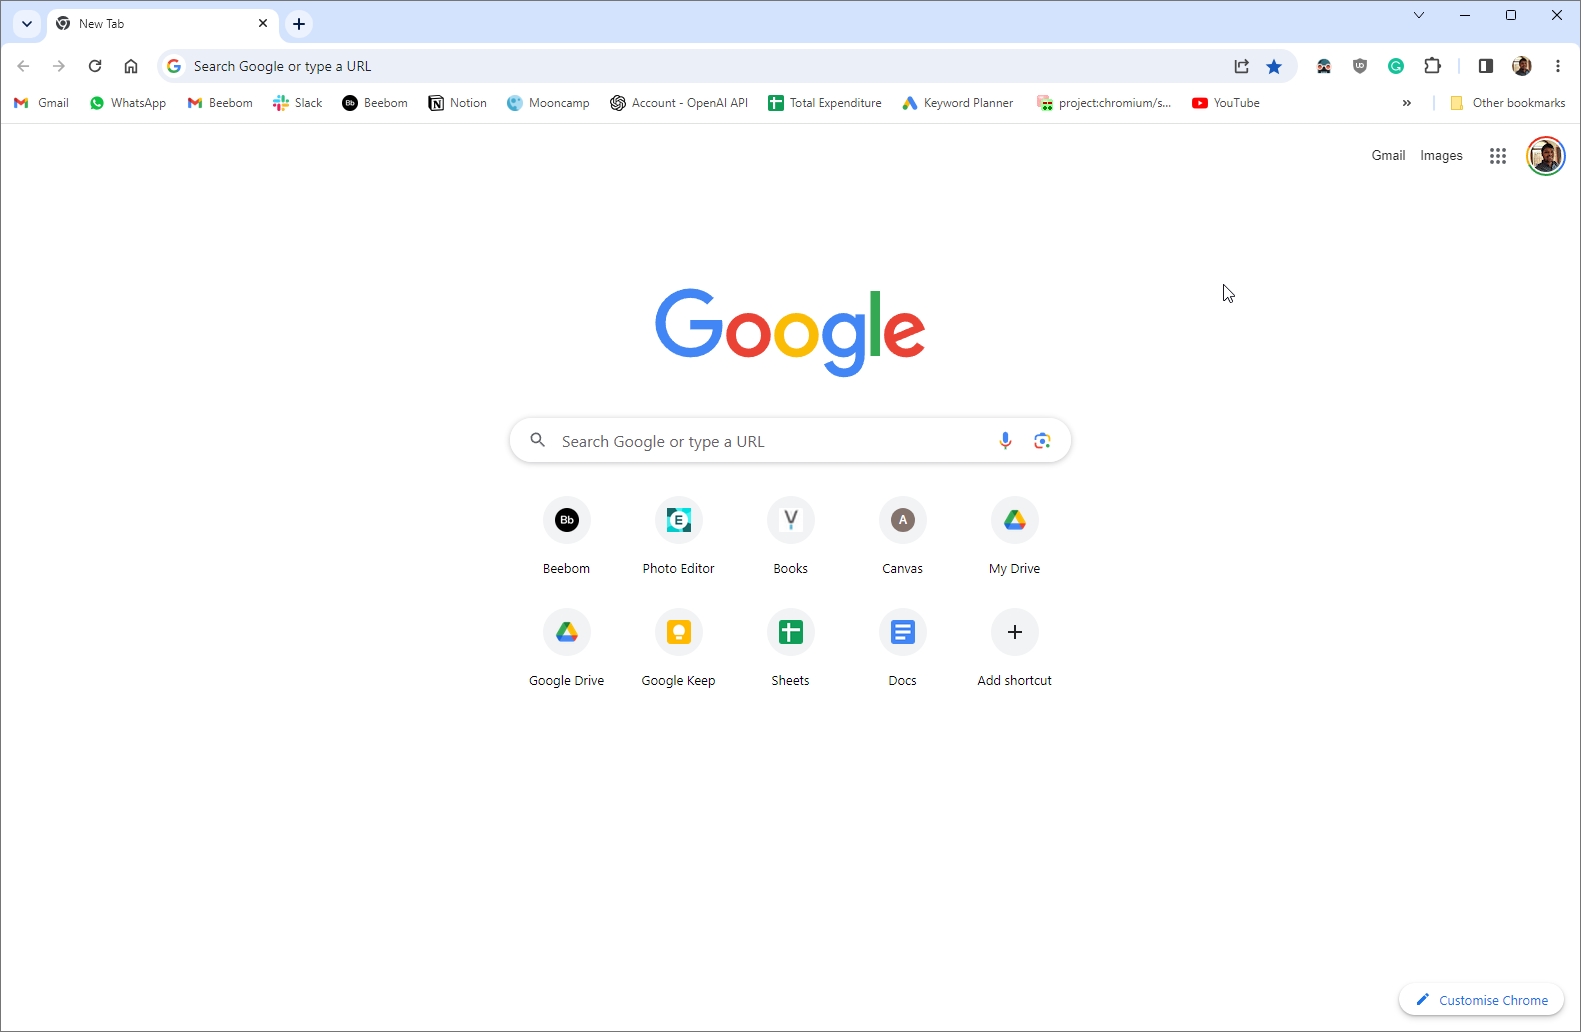 How to Customize Google Chrome with New Material Theming Options